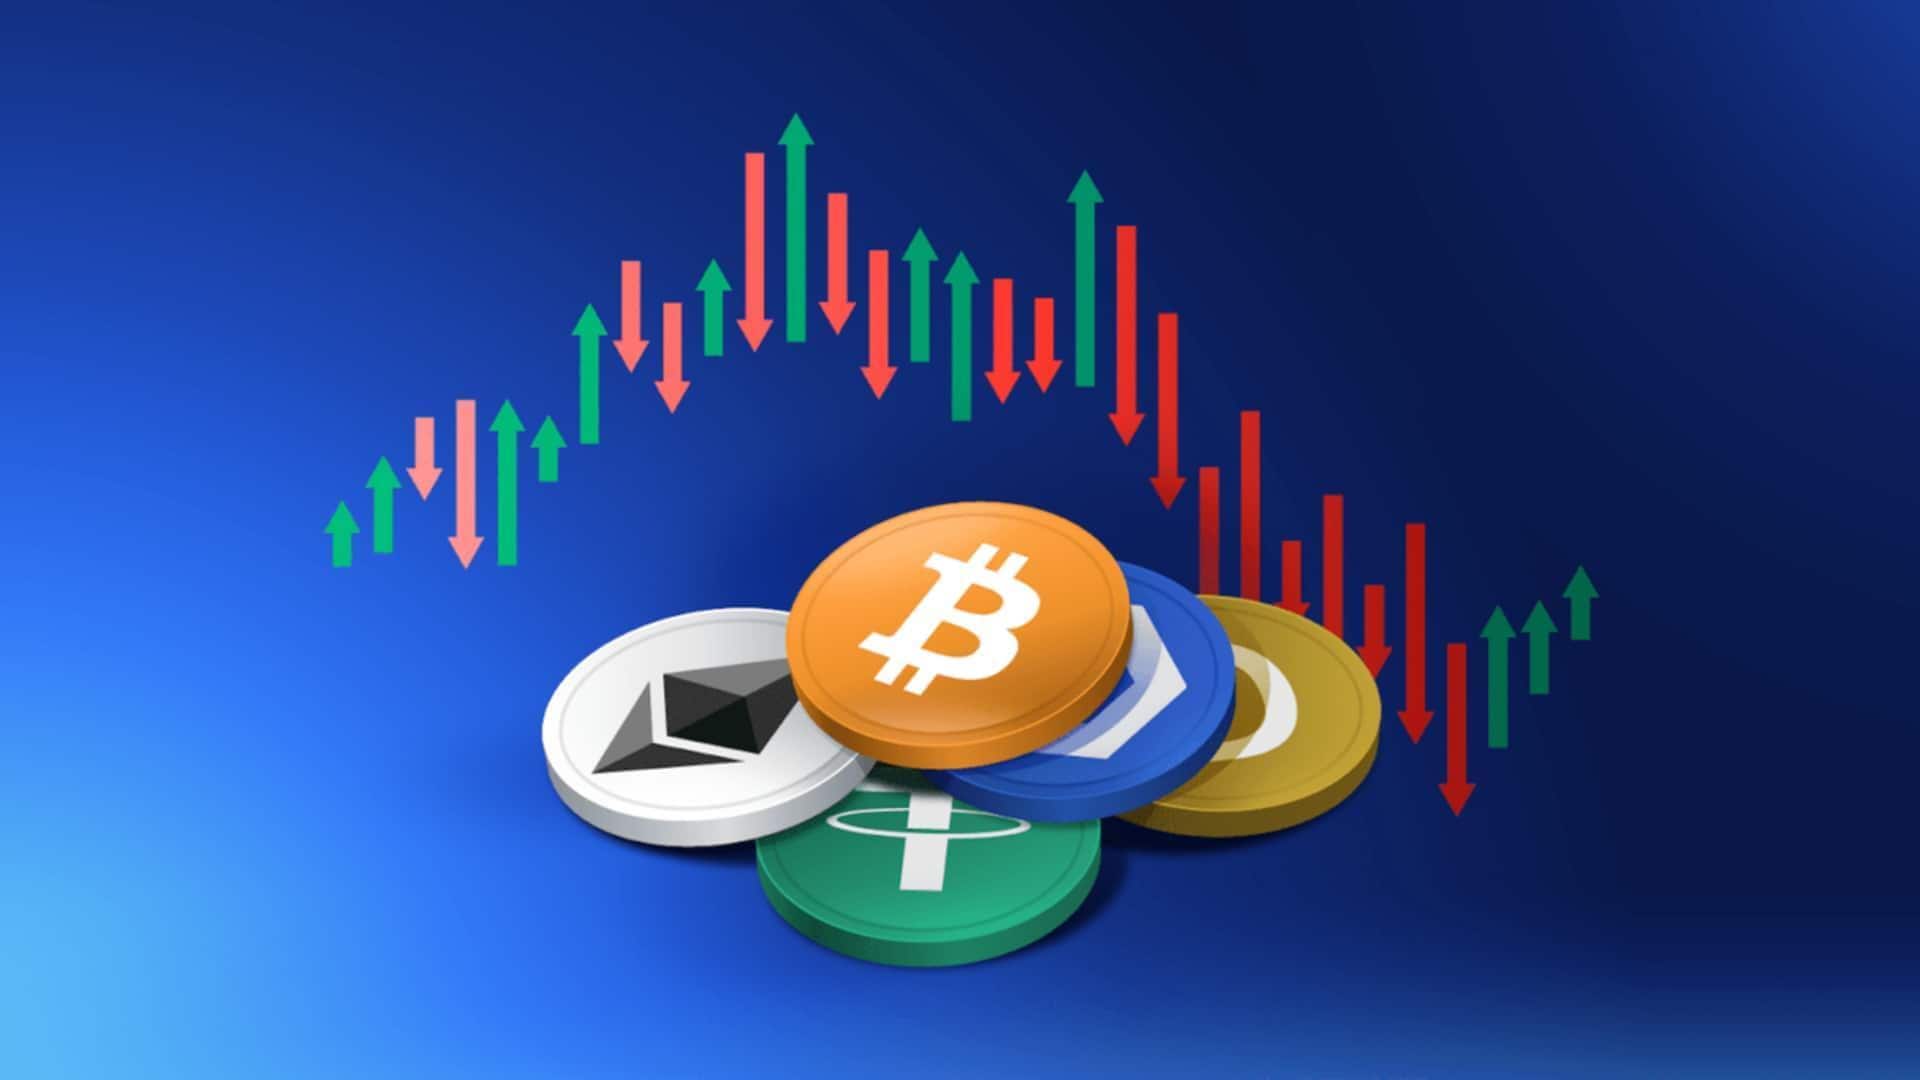 Cryptocurrency prices today: Check rates of Bitcoin, Ethereum, Dogecoin, Solana